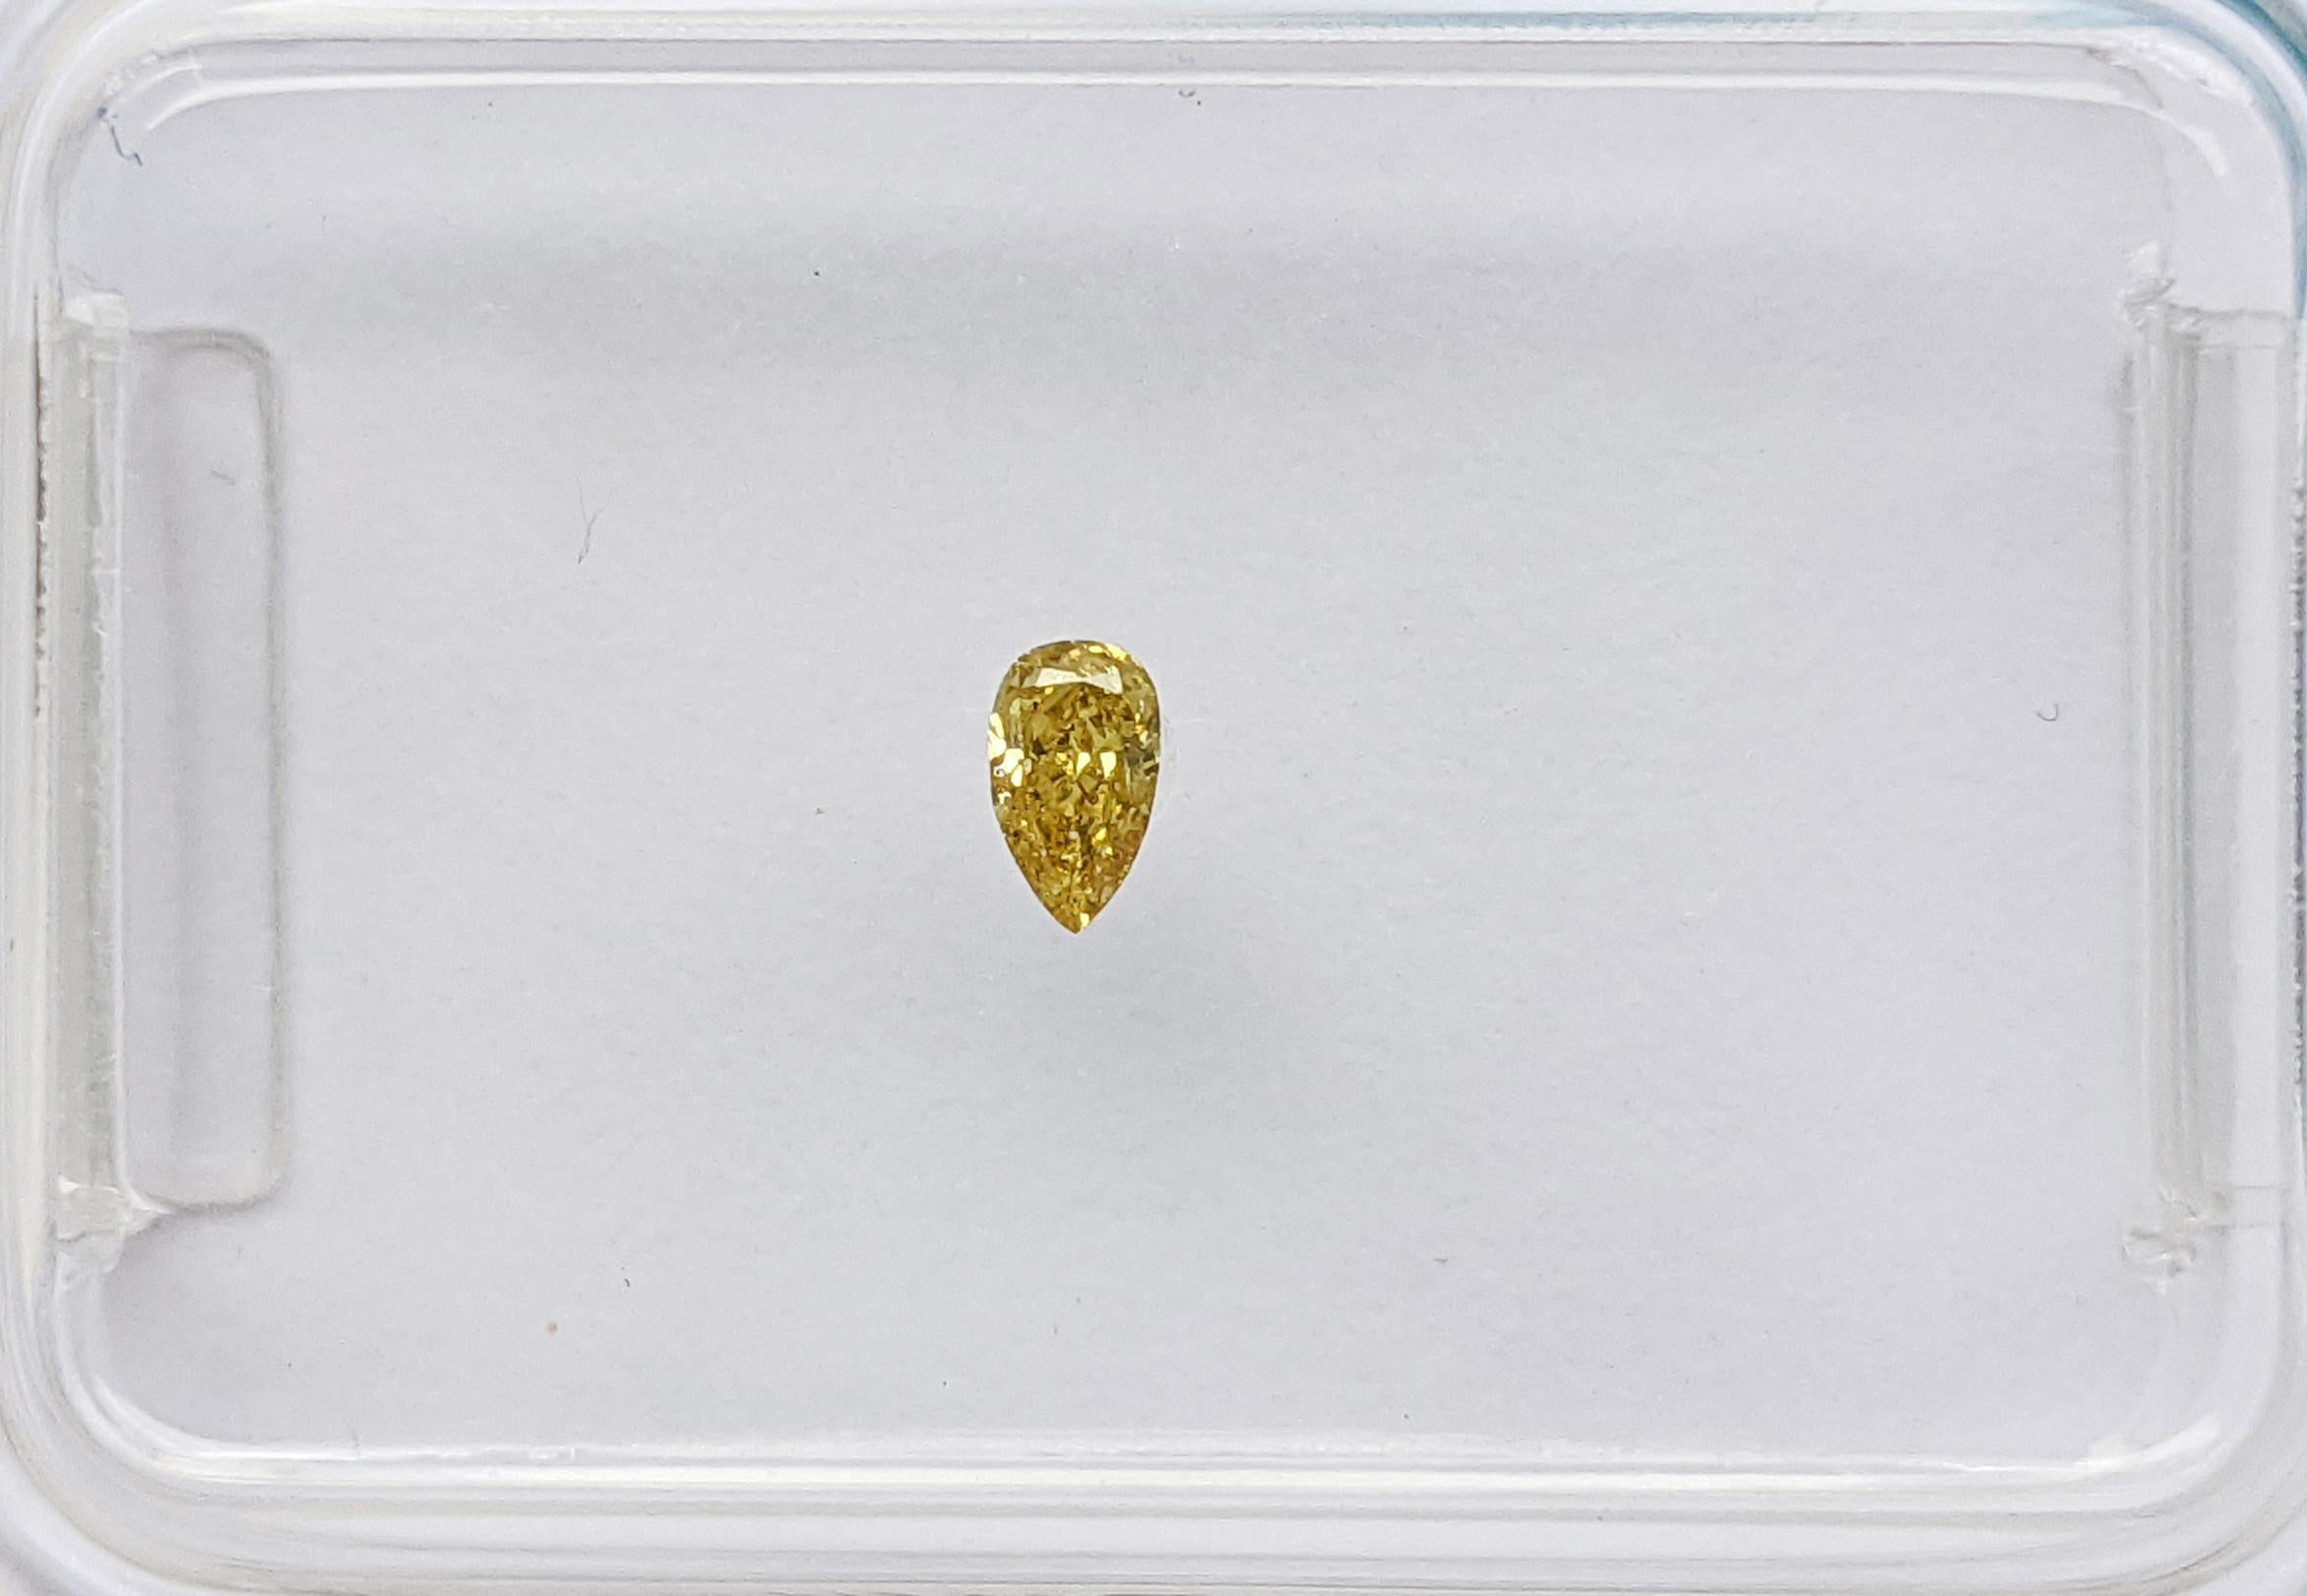 Discover a lovely 0.06ct Pear Brilliant diamond, certified by IGI. Its bright Fancy Vivid Yellow hue brings a cheerful touch. With a reliable VS2 clarity, this diamond is both beautiful and practical, perfect for everyday elegance.

No Reserve